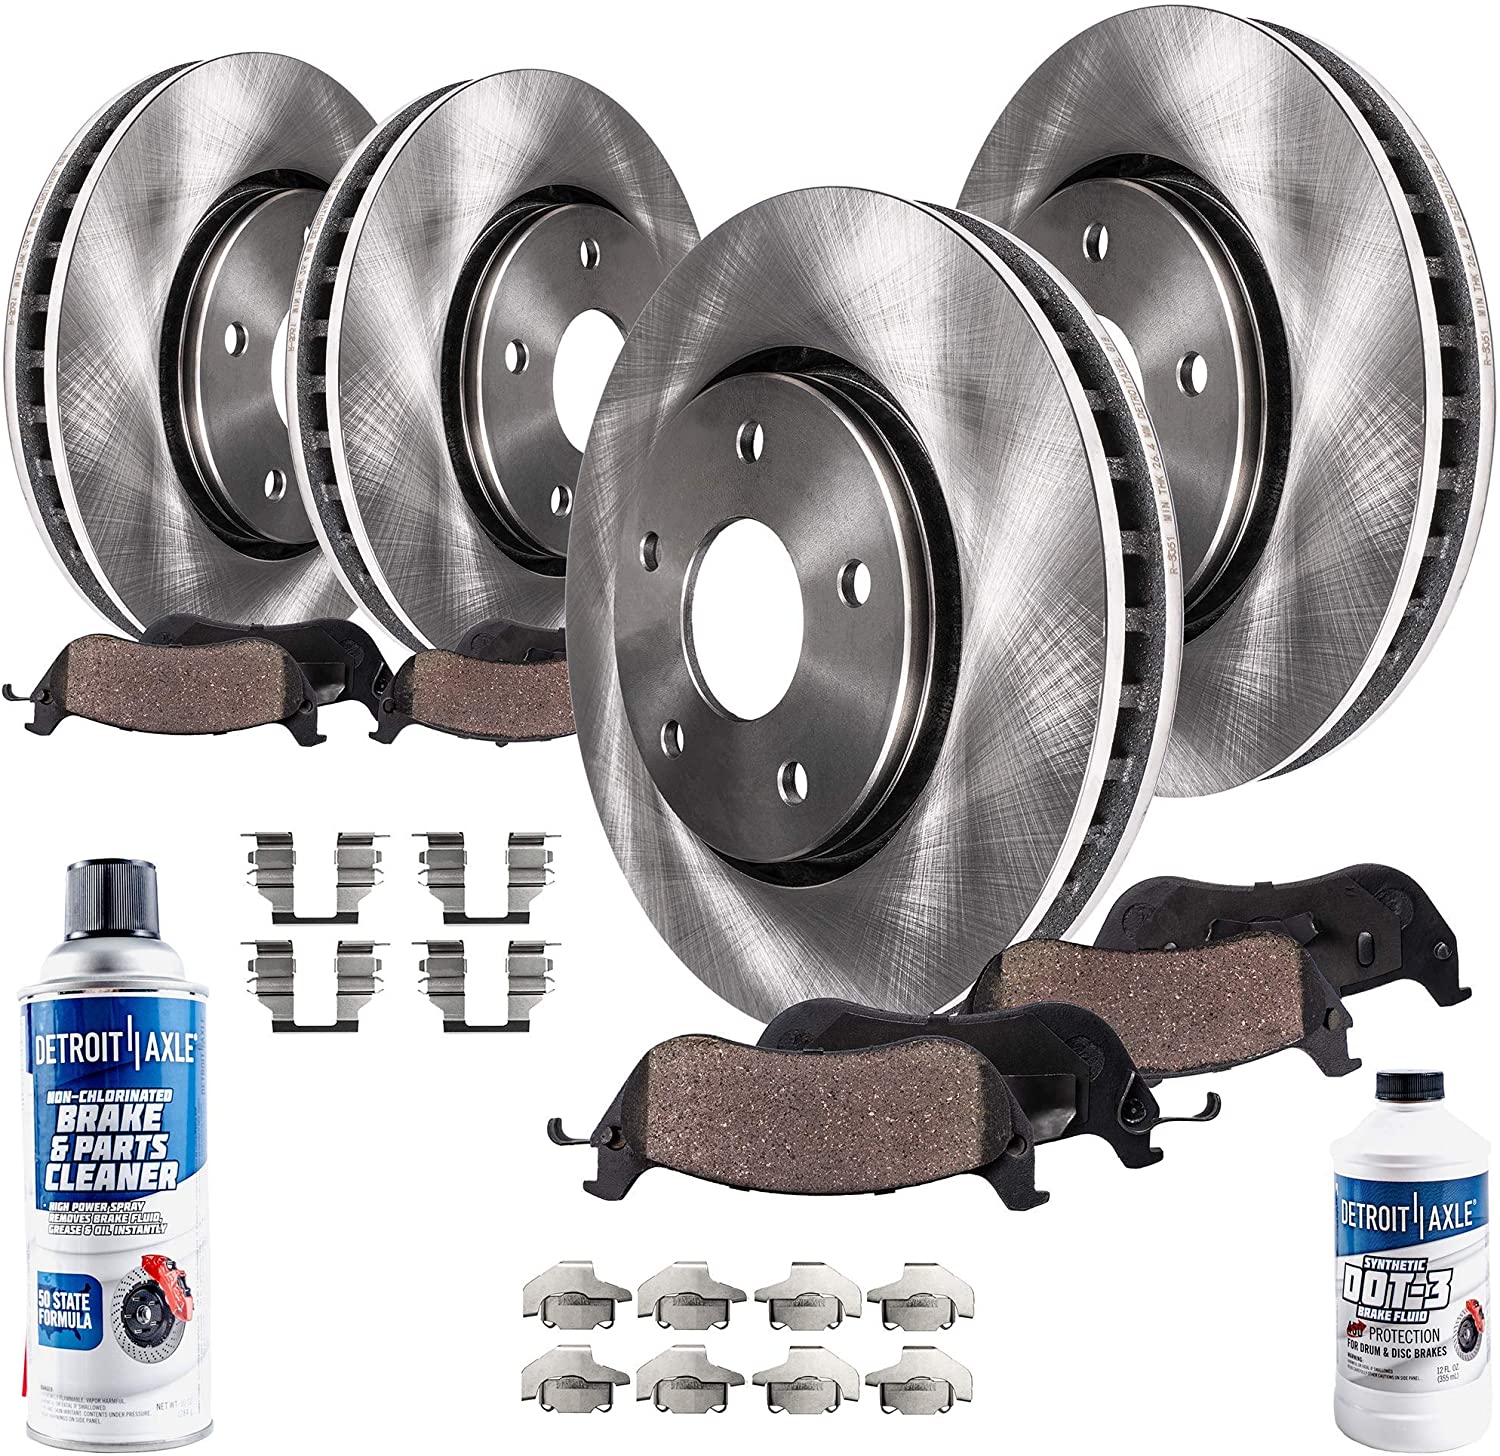 Detroit Axle - Front and Rear Disc Brake Kit Rotors w/Ceramic Pads w/Hardware & Brake Kit Cleaner & Fluid for 2013-2017 Ford C-Max Energi - [2013 2014 2015 2016 Ford Escape 1.6L or 2.5L 2WD Only]